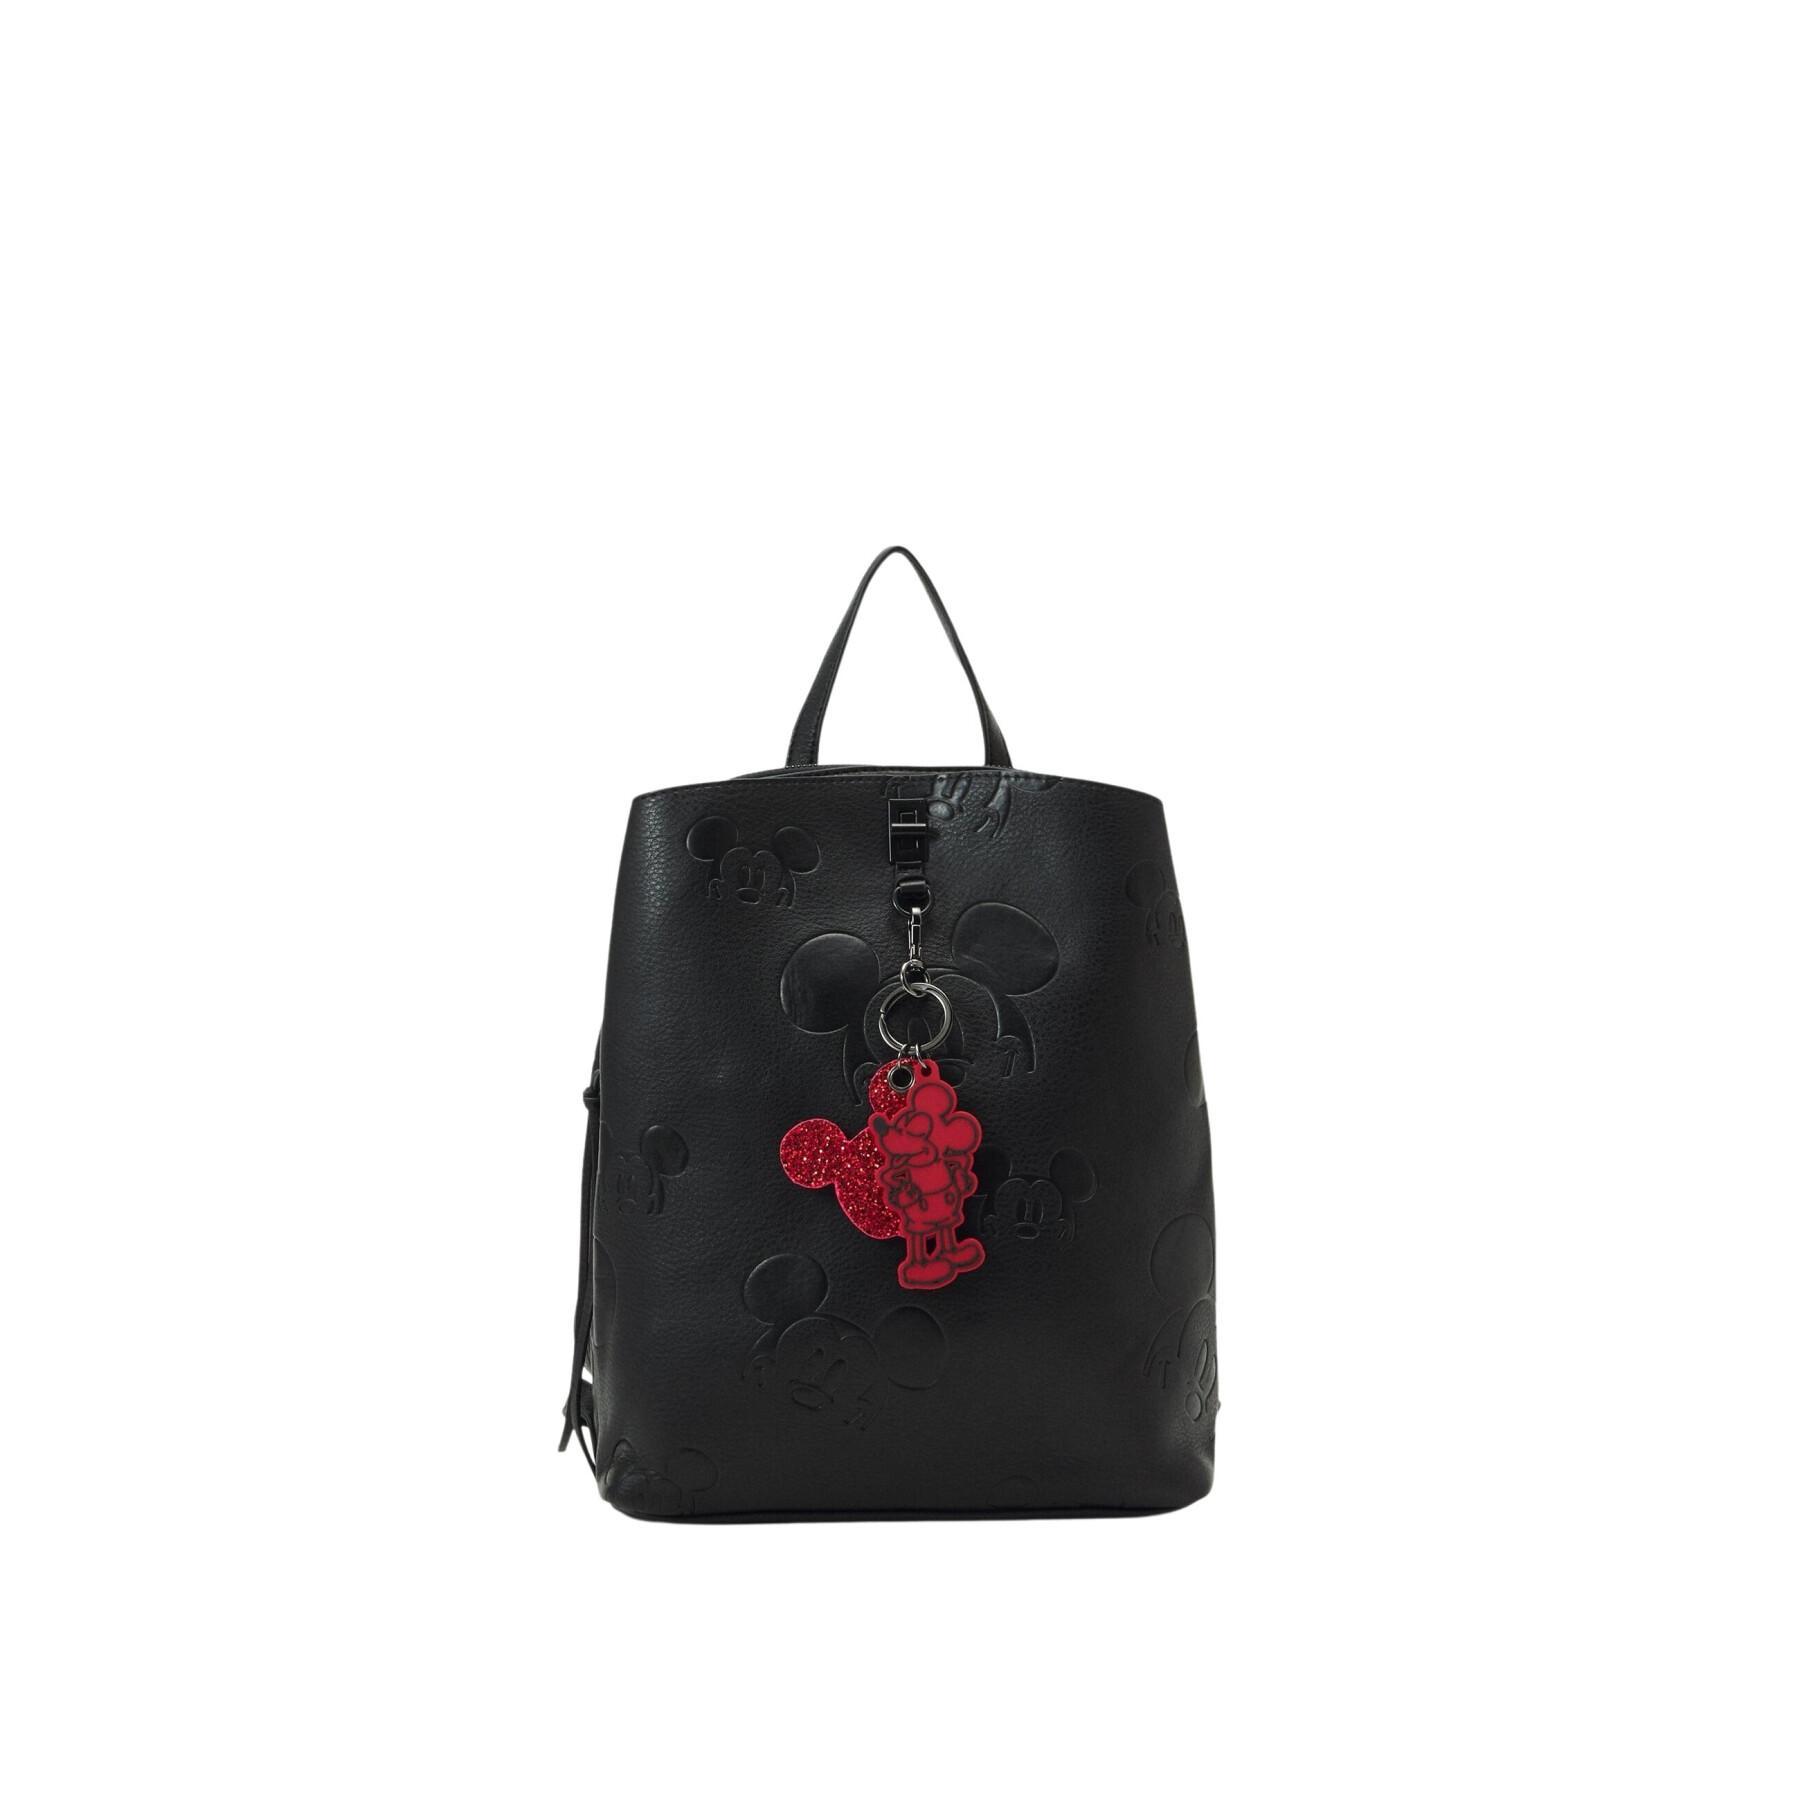 Women's backpack Desigual All Mickey 23